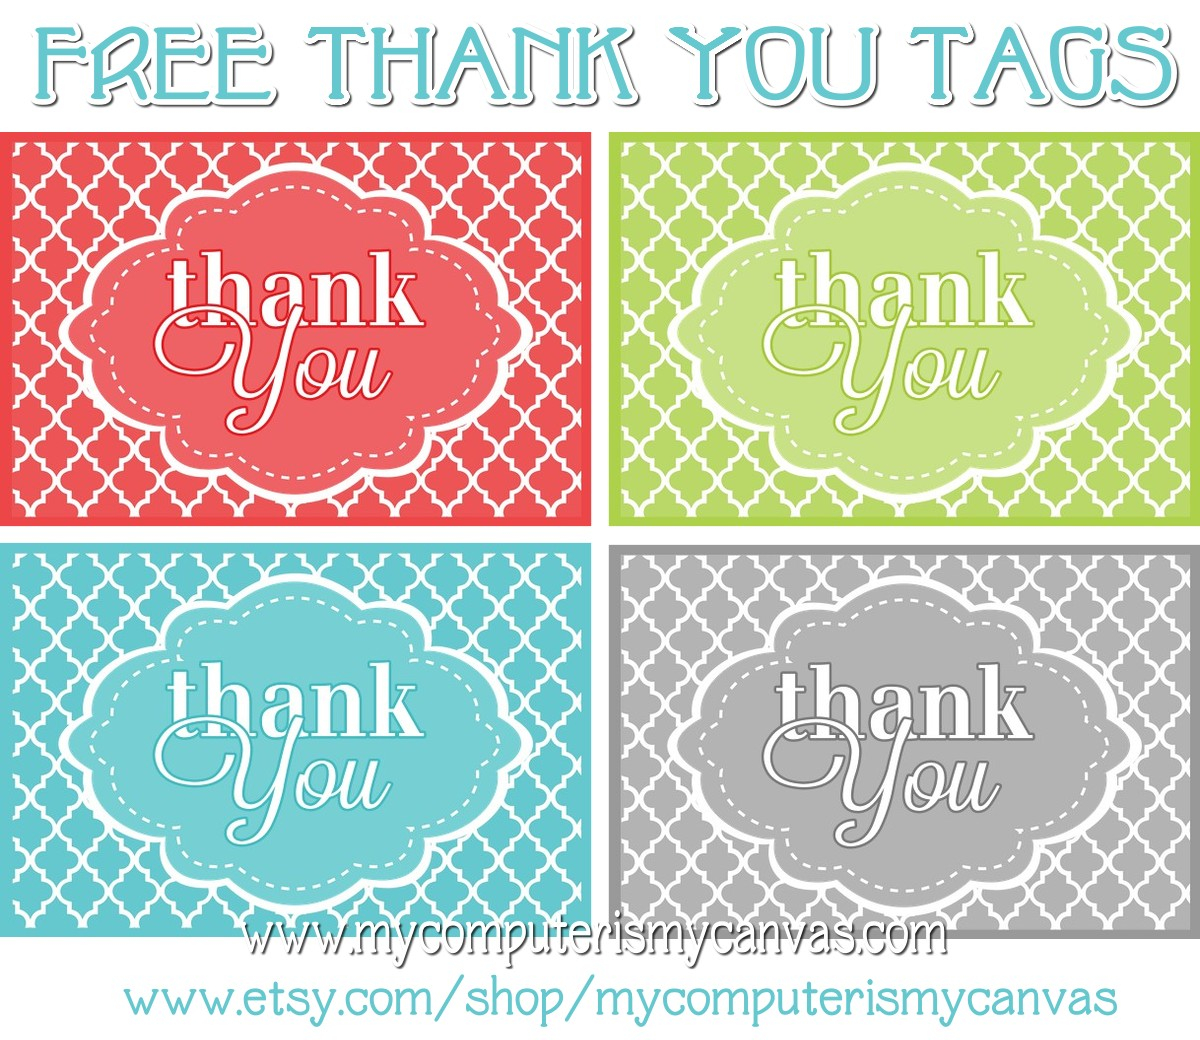 My Computer Is My Canvas FREEBIE PRINTABLE THANK YOU TAGS